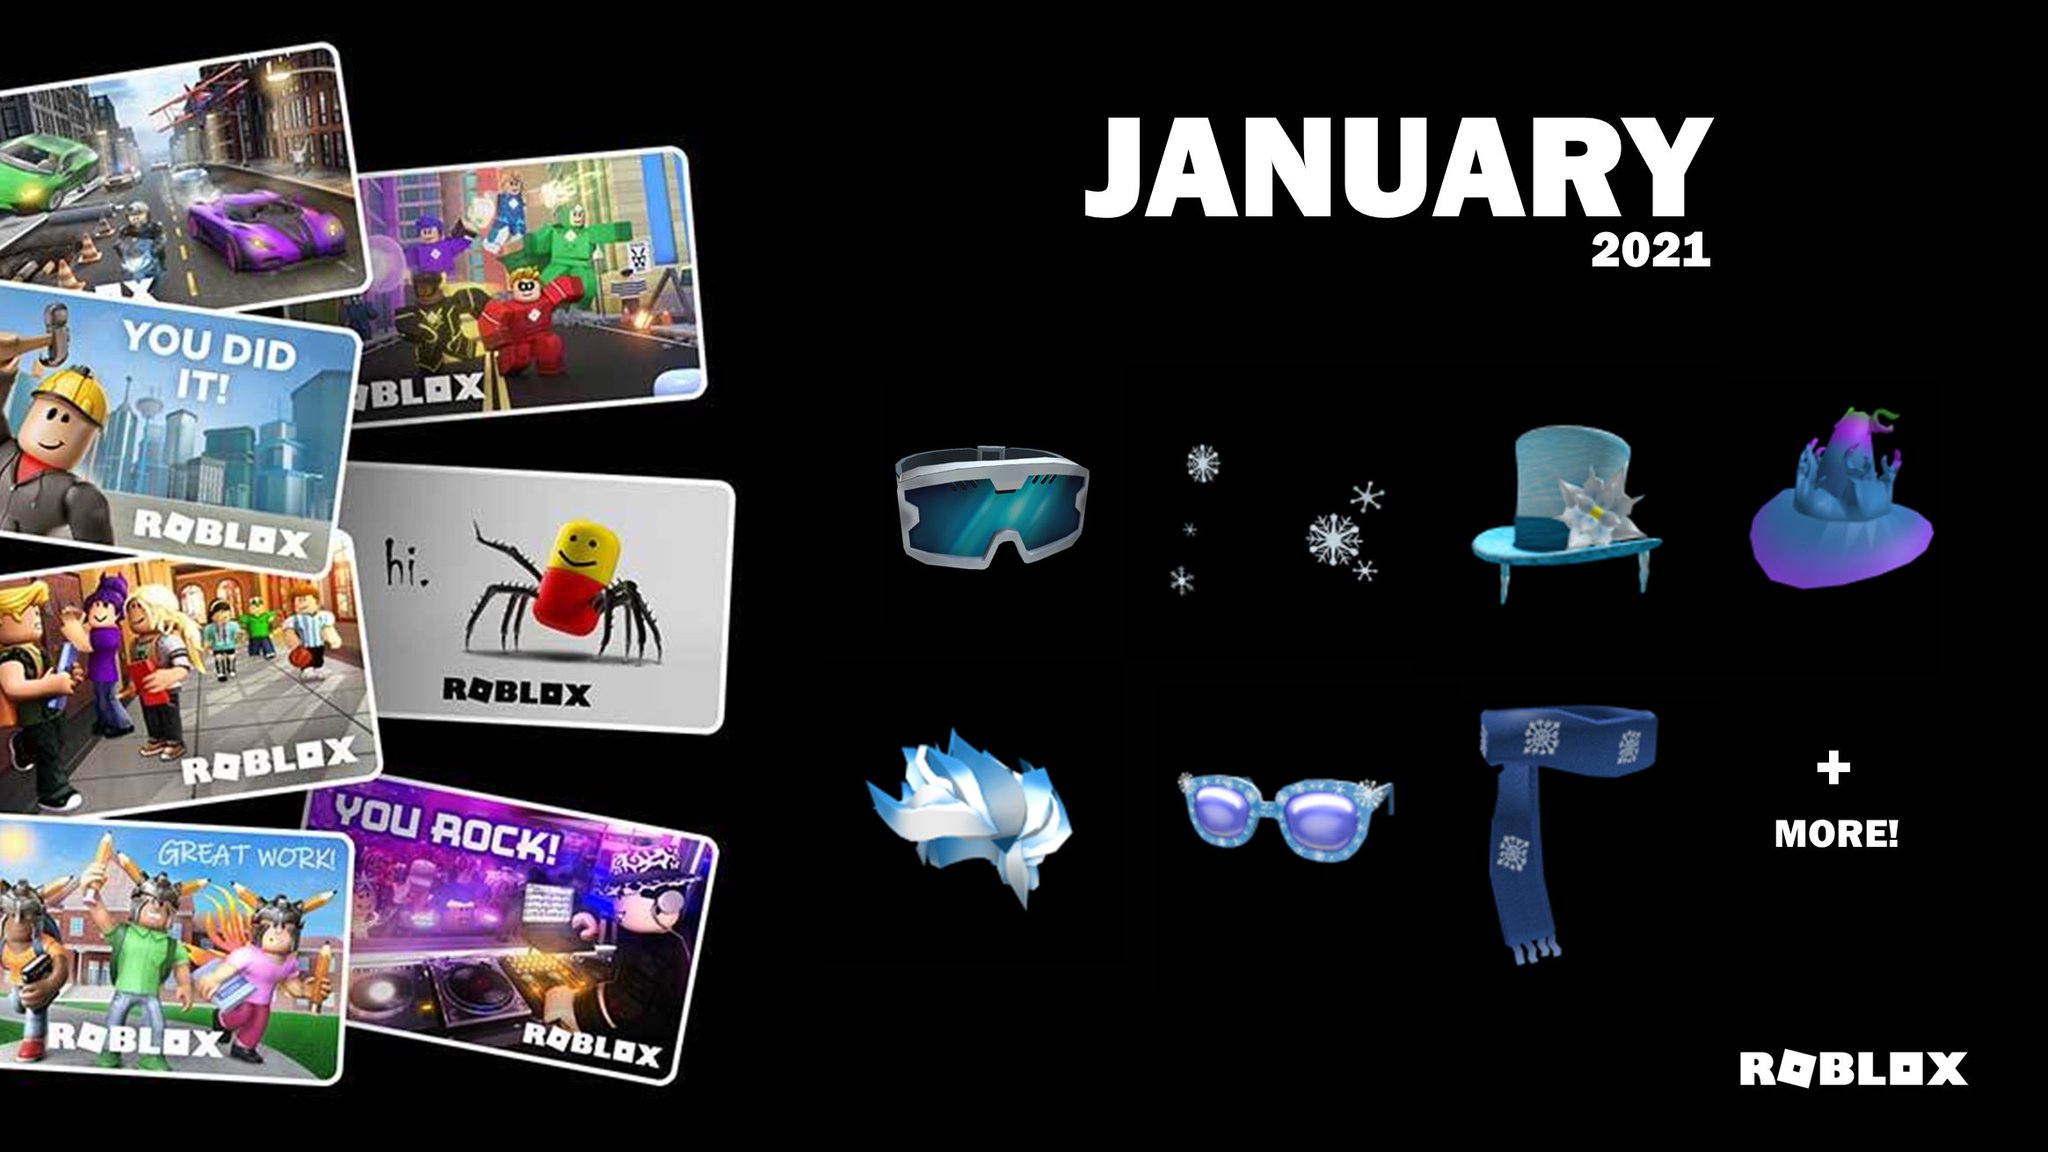 Bloxy News On Twitter The Roblox Gift Card Virtual Items And Their Corresponding Stores For January 2021 Are Now Available Check Them Out Here Https T Co Pujwqlz5yt Purchase A Gift Card - cheap roblox gift cards